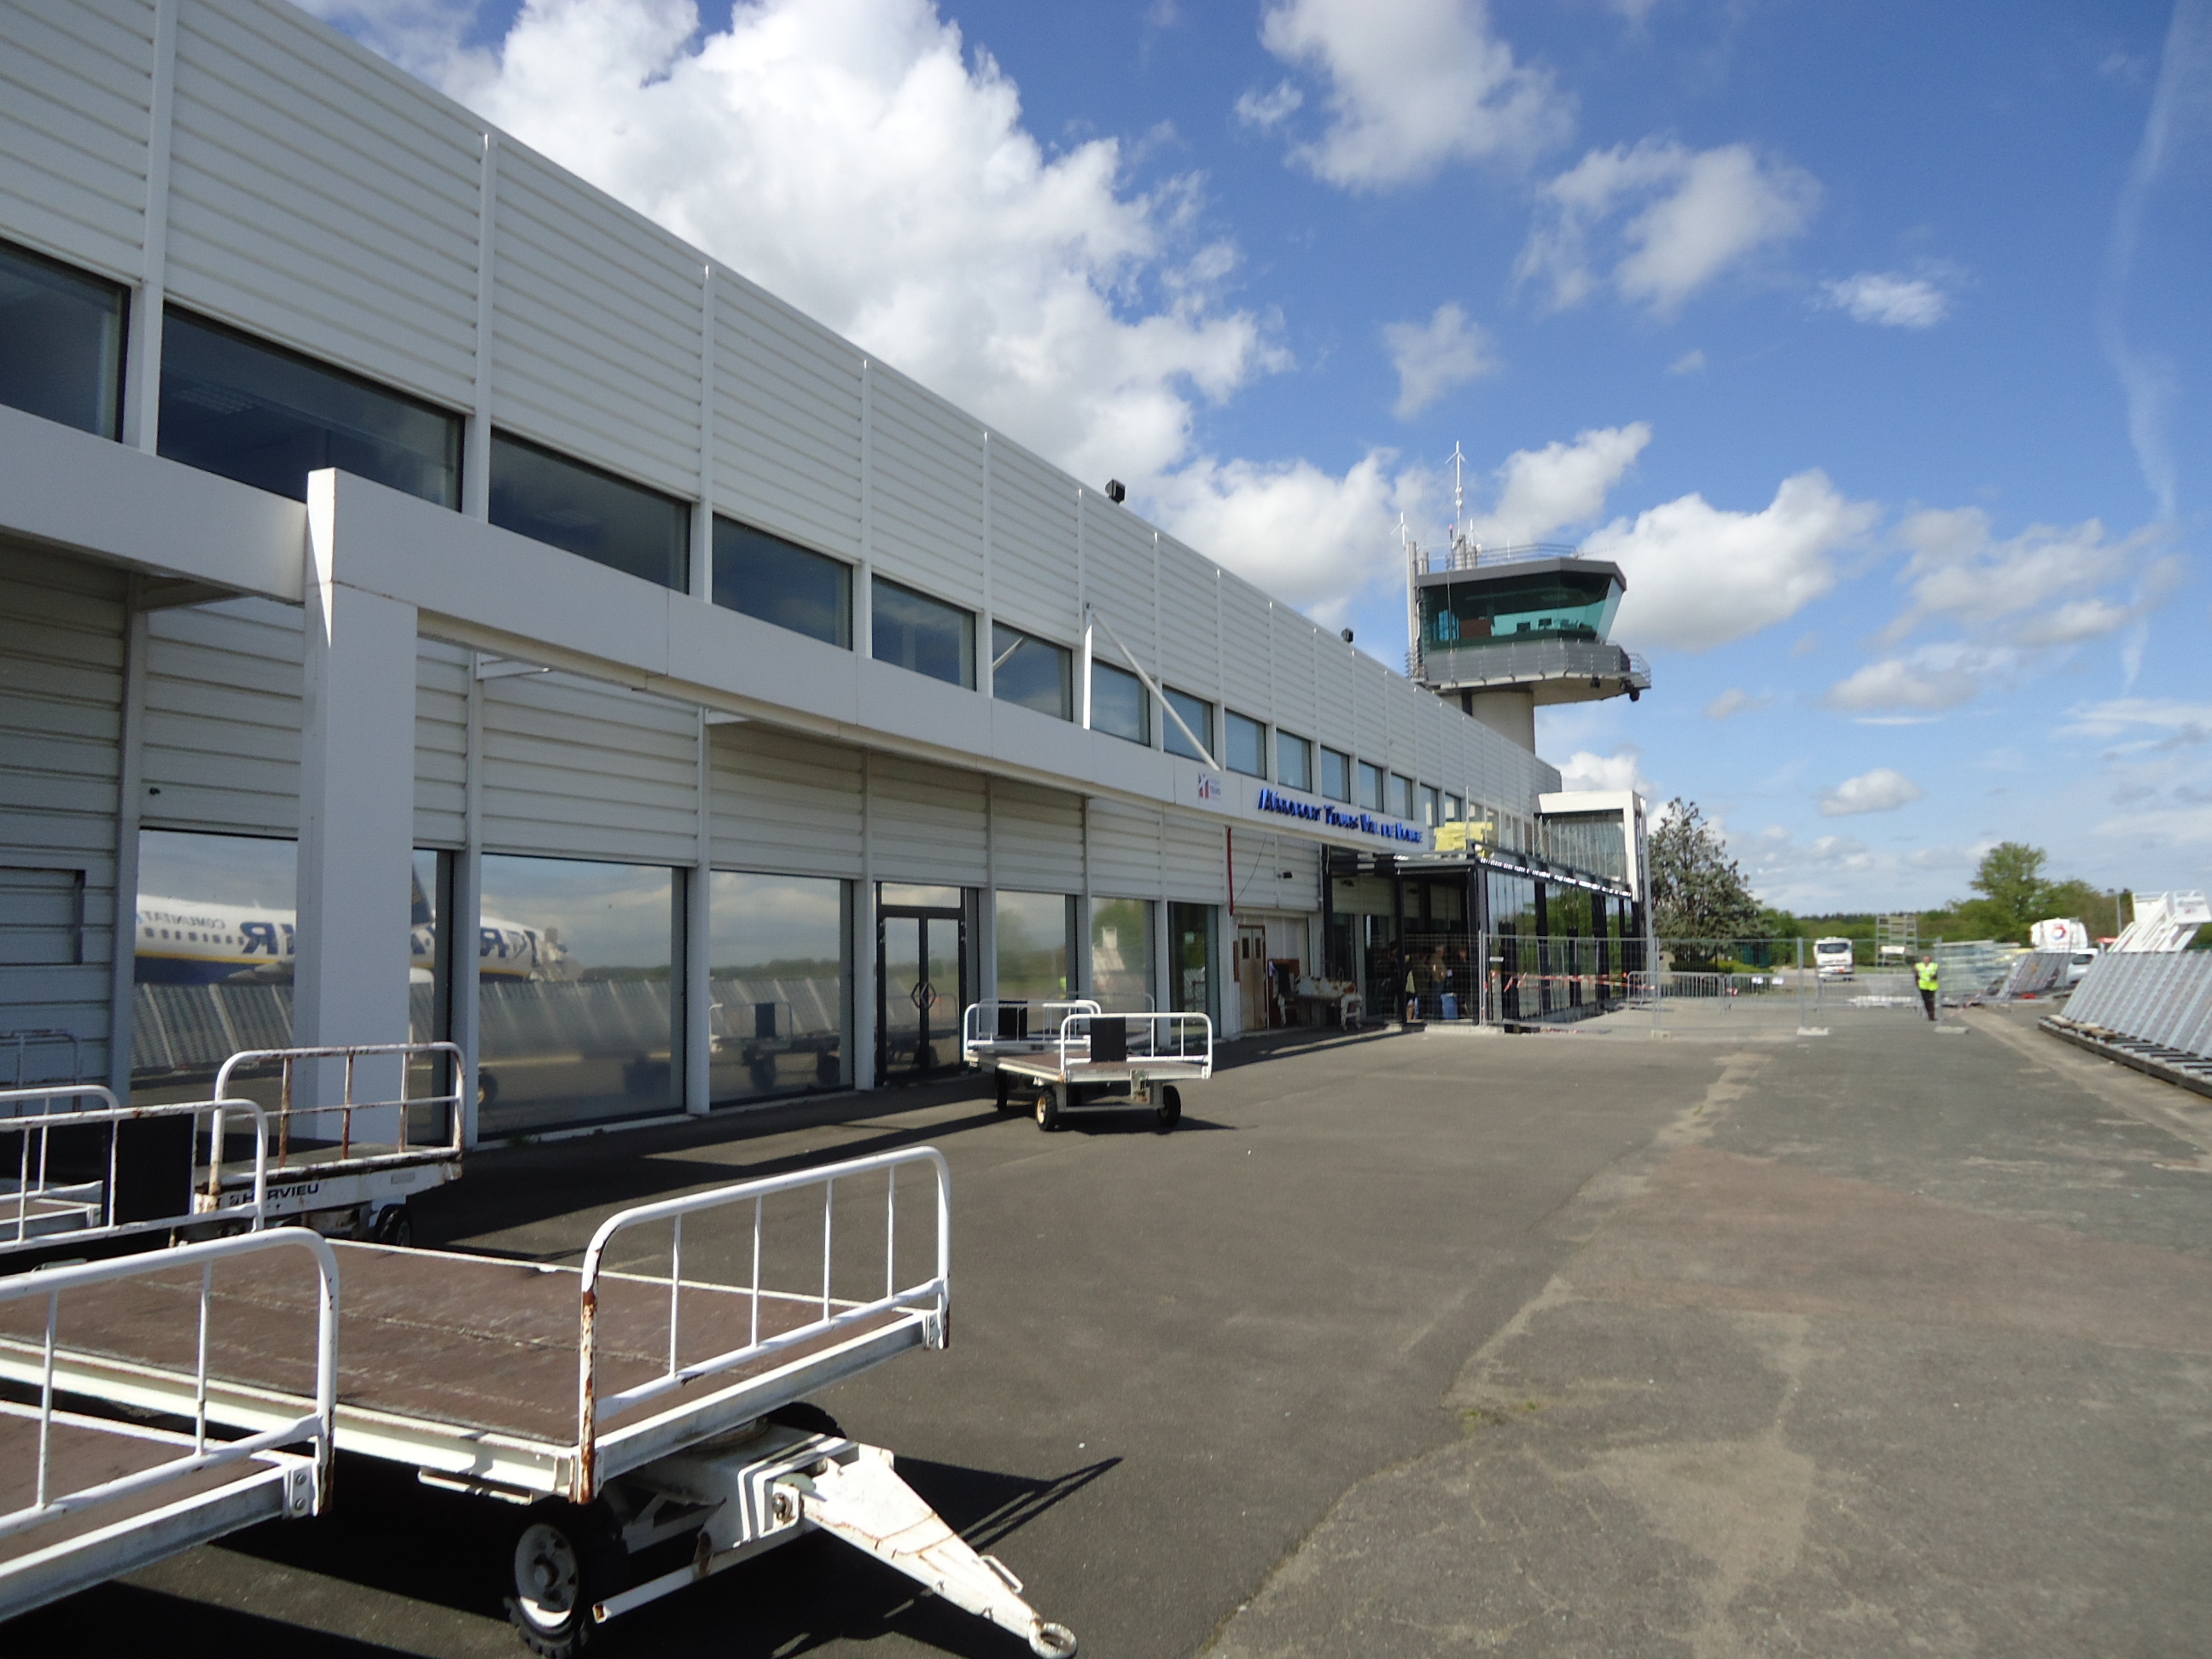 tours loire valley airport